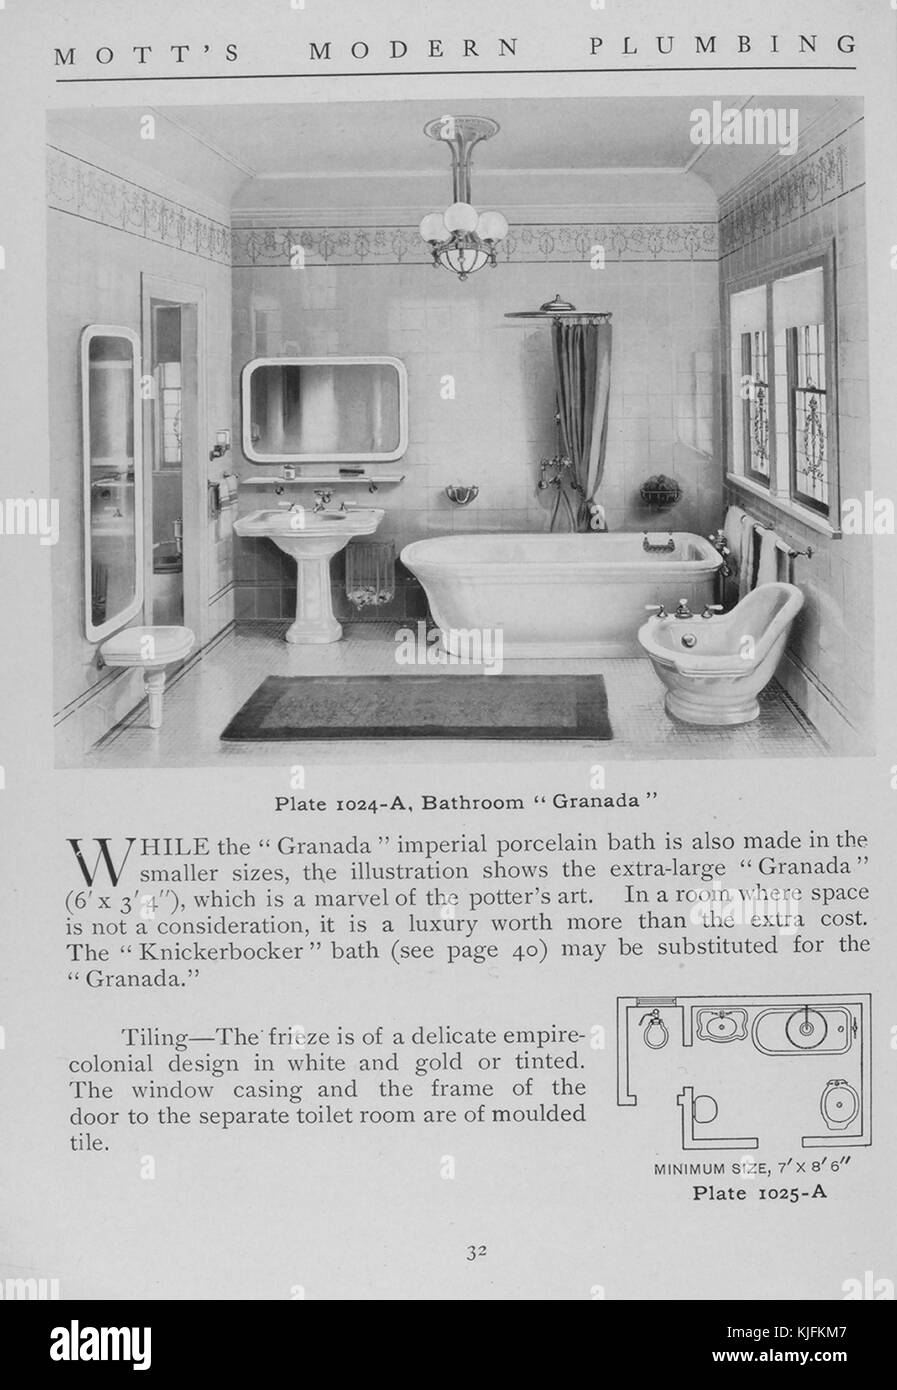 Bathroom, Granada style, 1911. From the New York Public Library. This plate is from Motts Modern Plumbing, a catalog depicting different styles of bathroom fixtures. Stock Photo